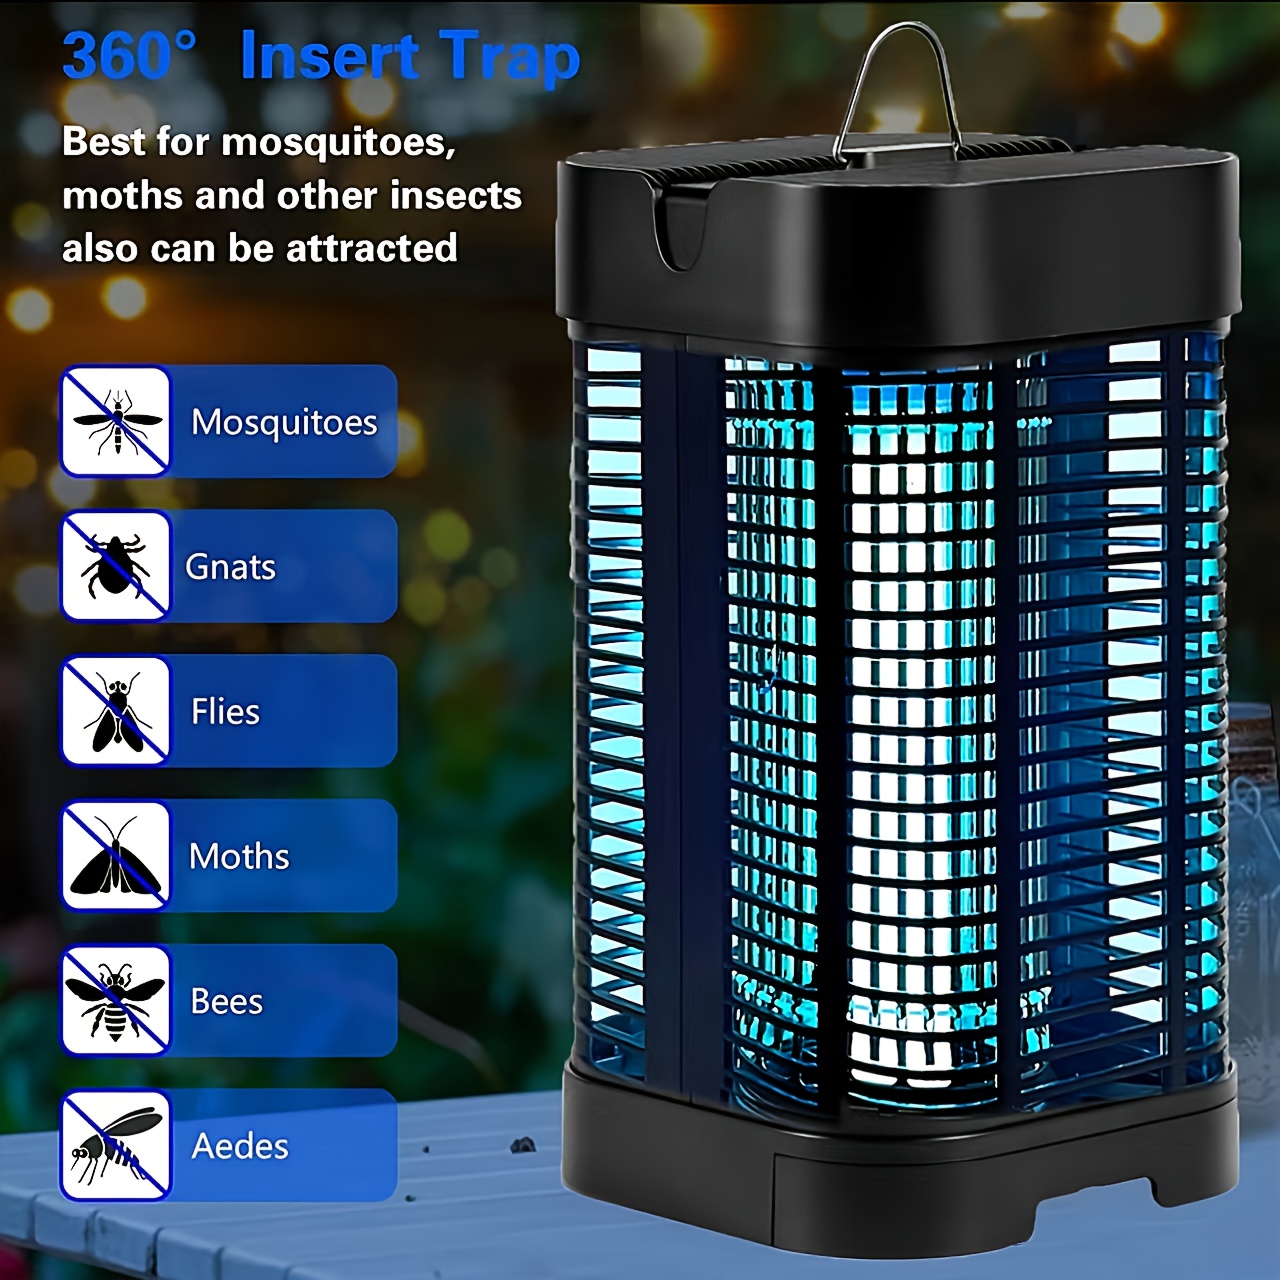 

Bug Zapper Outdoor, Mosquito Zapper With Led Light, Fly Zapper Outdoor Indoor, Insect Zapper Electric Fly Traps, Plug In Mosquito Killer For Patio Yard